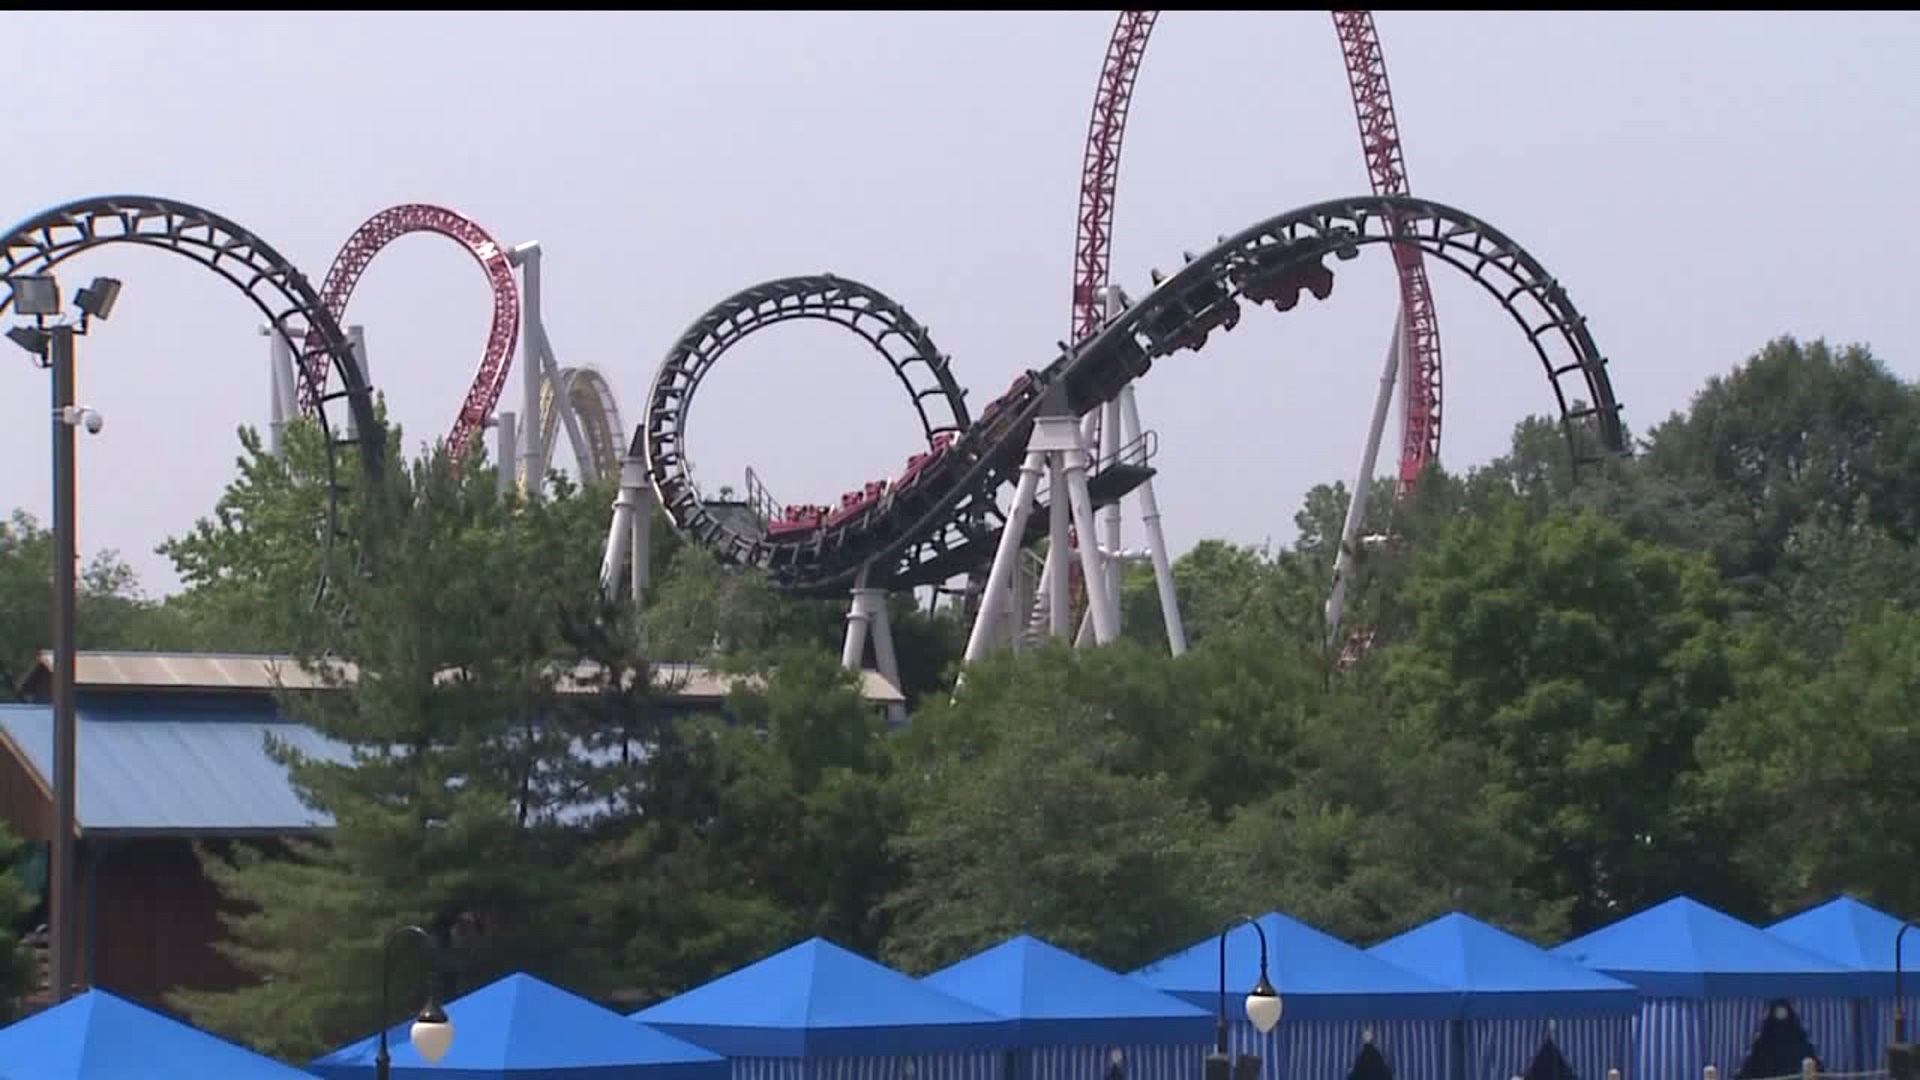 `Unacceptable`: Parent Frustrated with how Hersheypark Handled Report of Attempted Child Abduction